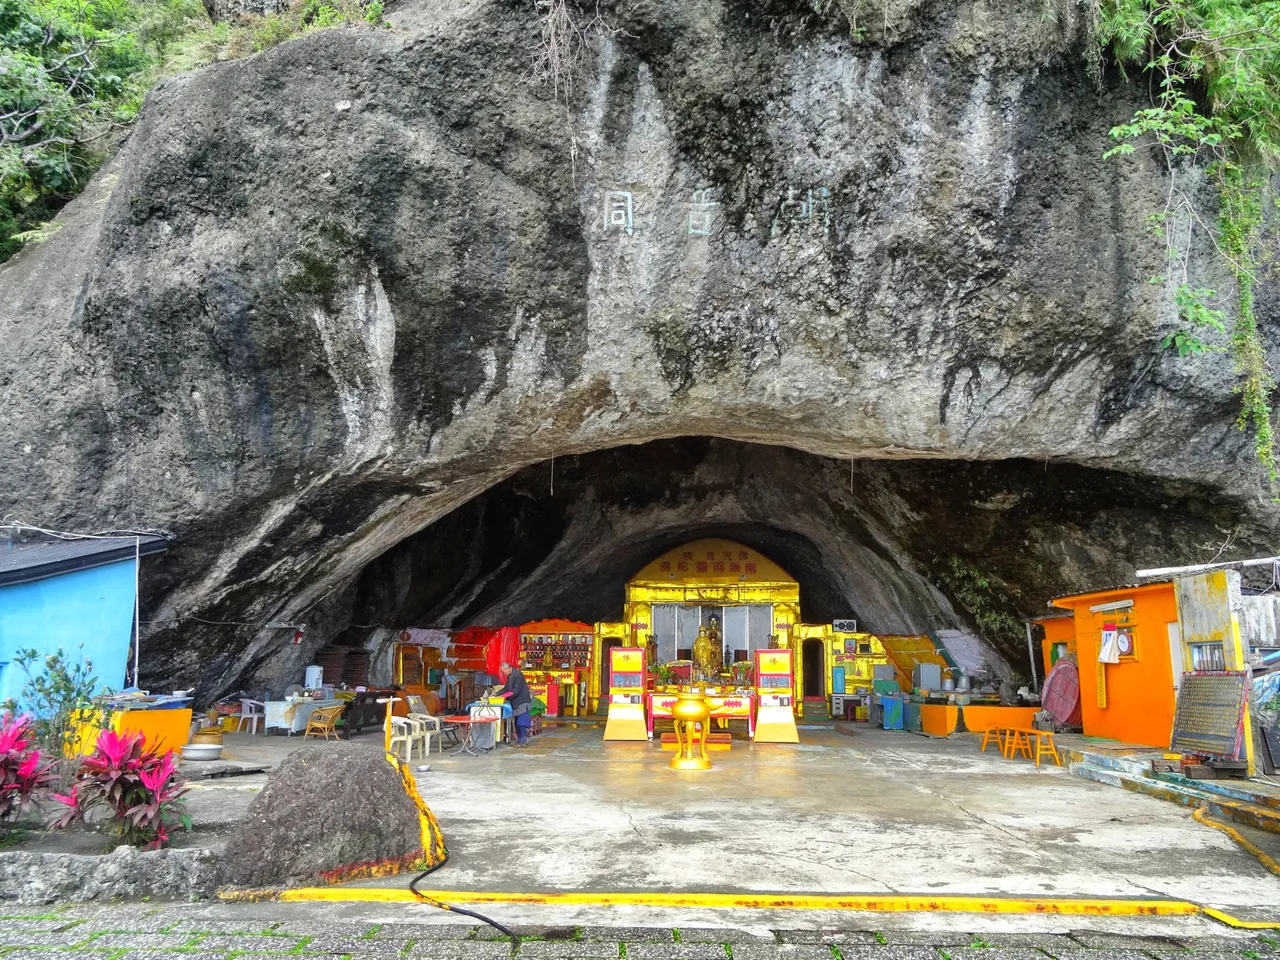 One sea cave is a church now